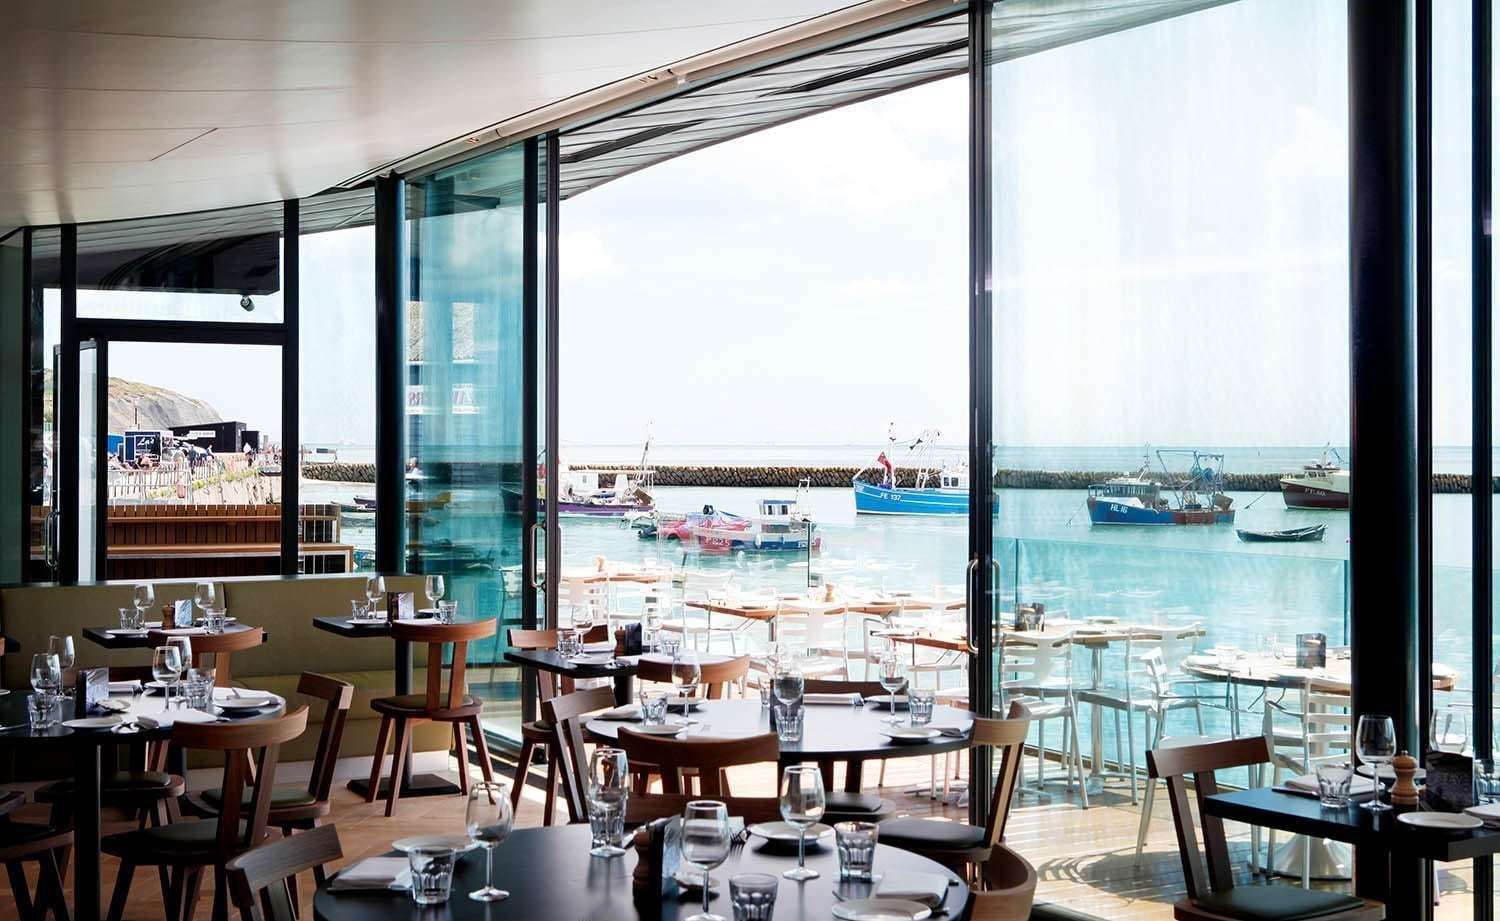 Rocksalt in Folkestone is one of the county's premiere dining destinations